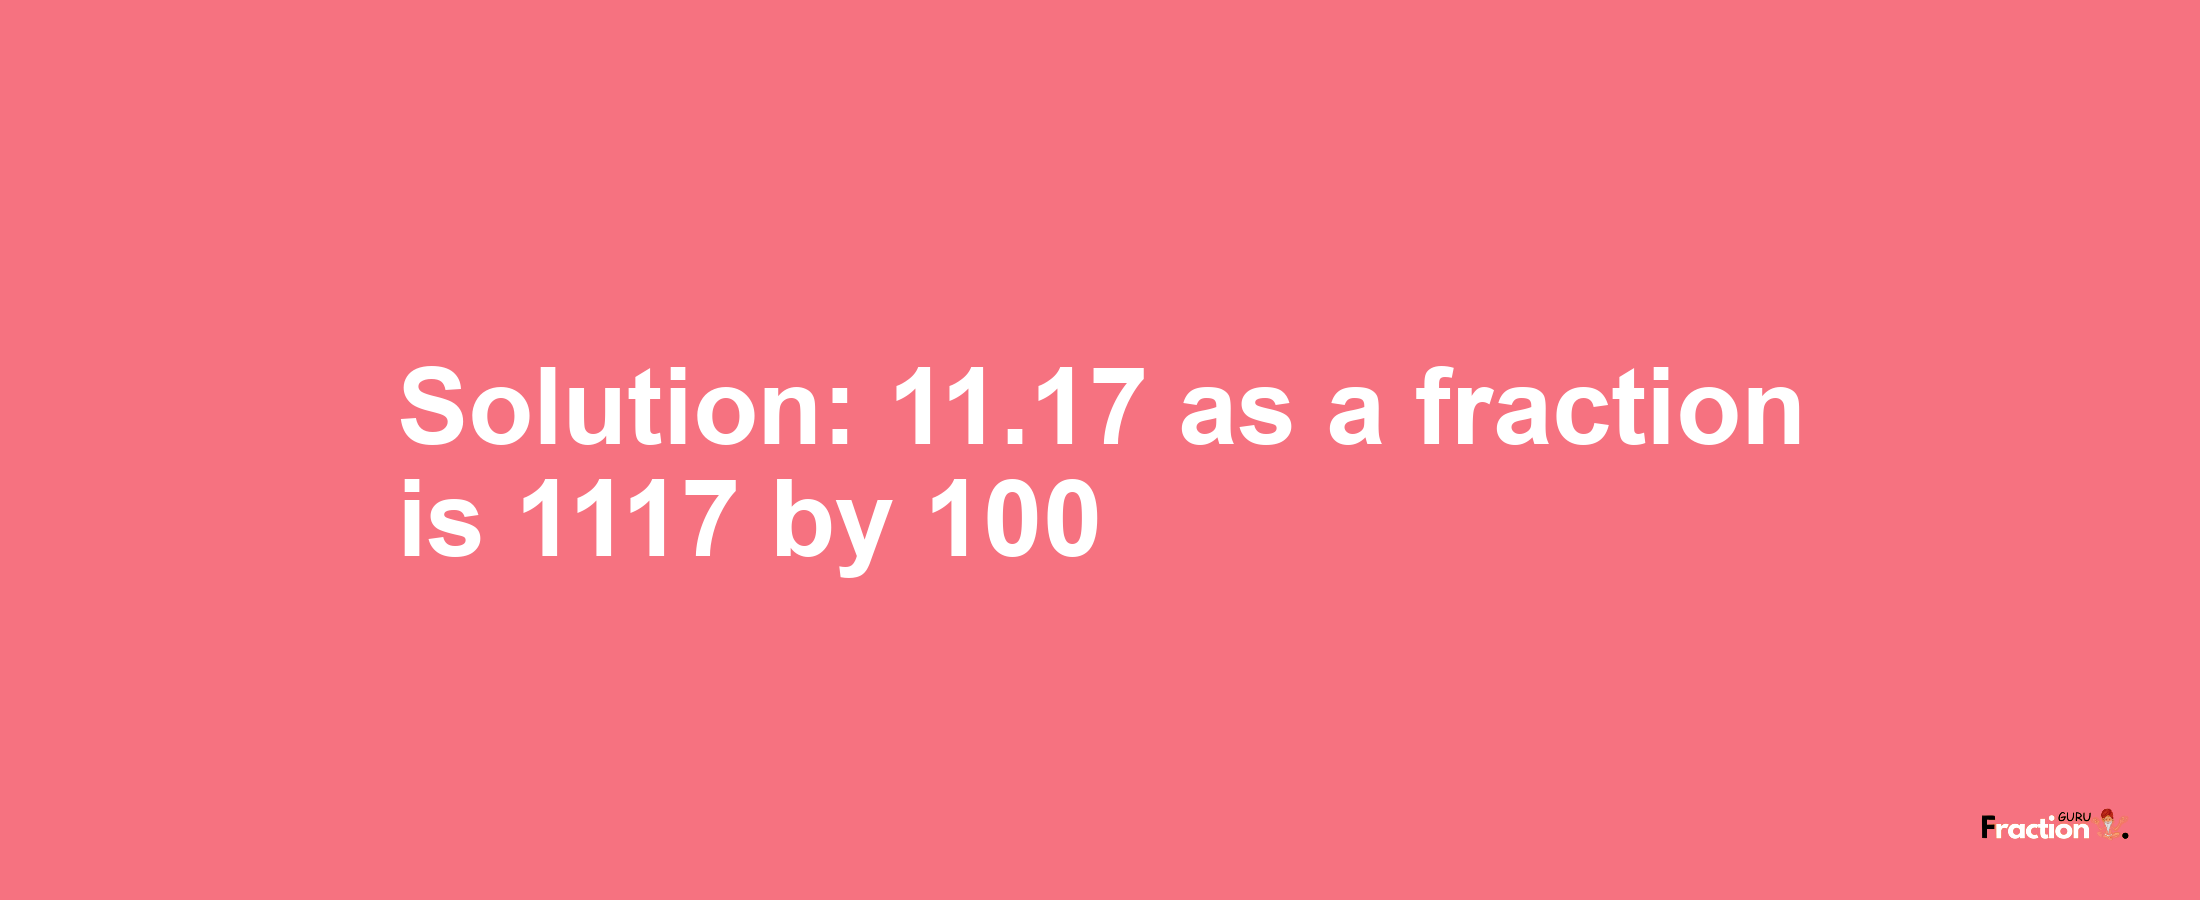 Solution:11.17 as a fraction is 1117/100